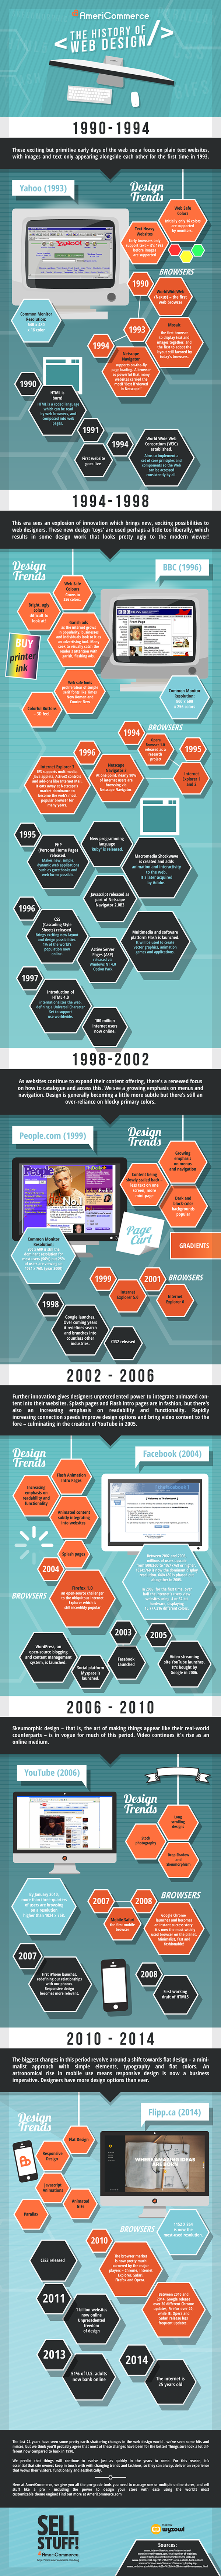 history-of-web-design-infographic